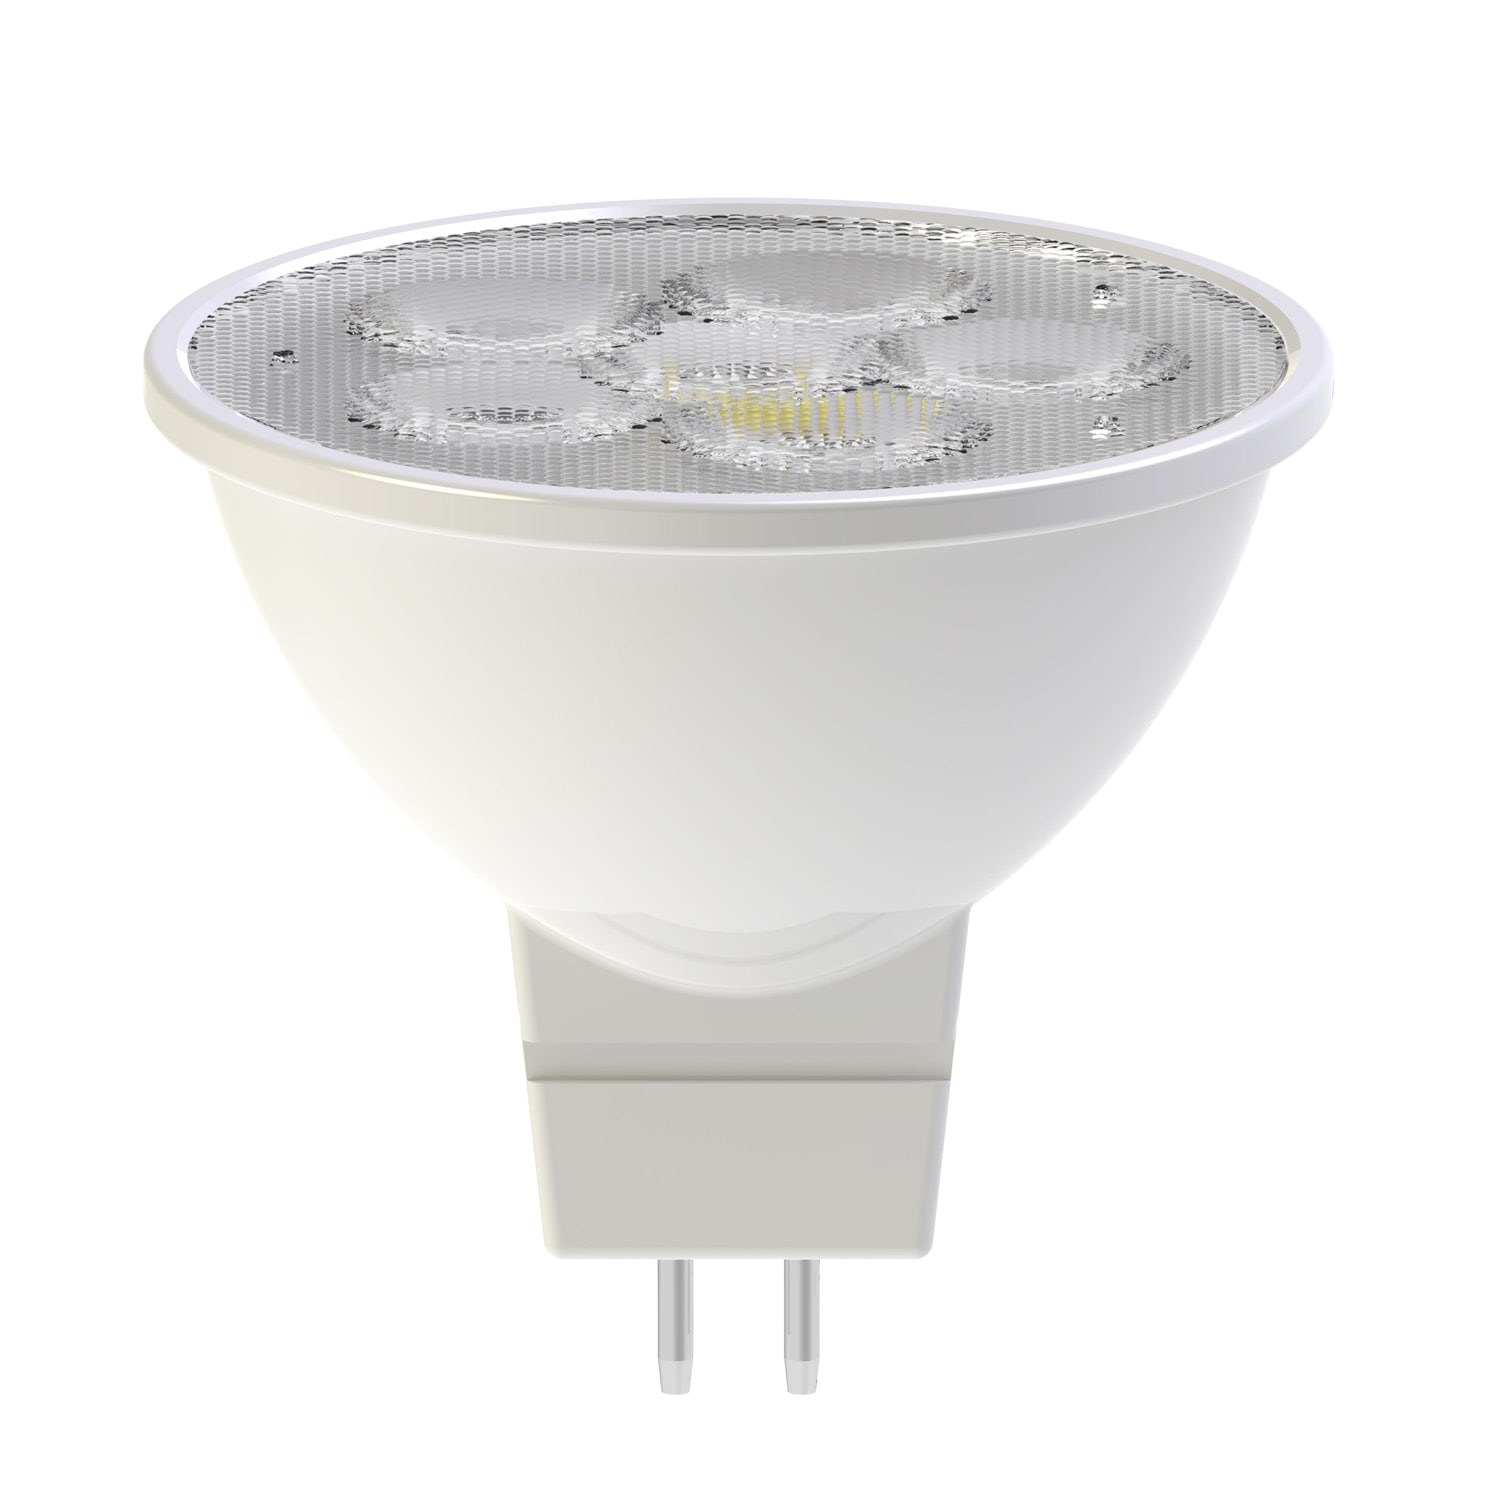 Vandt Lave dæmning GE Classic 50-Watt EQ MR16 Warm White Gu5.3 Dimmable LED Light Bulb (3-Pack)  in the General Purpose Light Bulbs department at Lowes.com